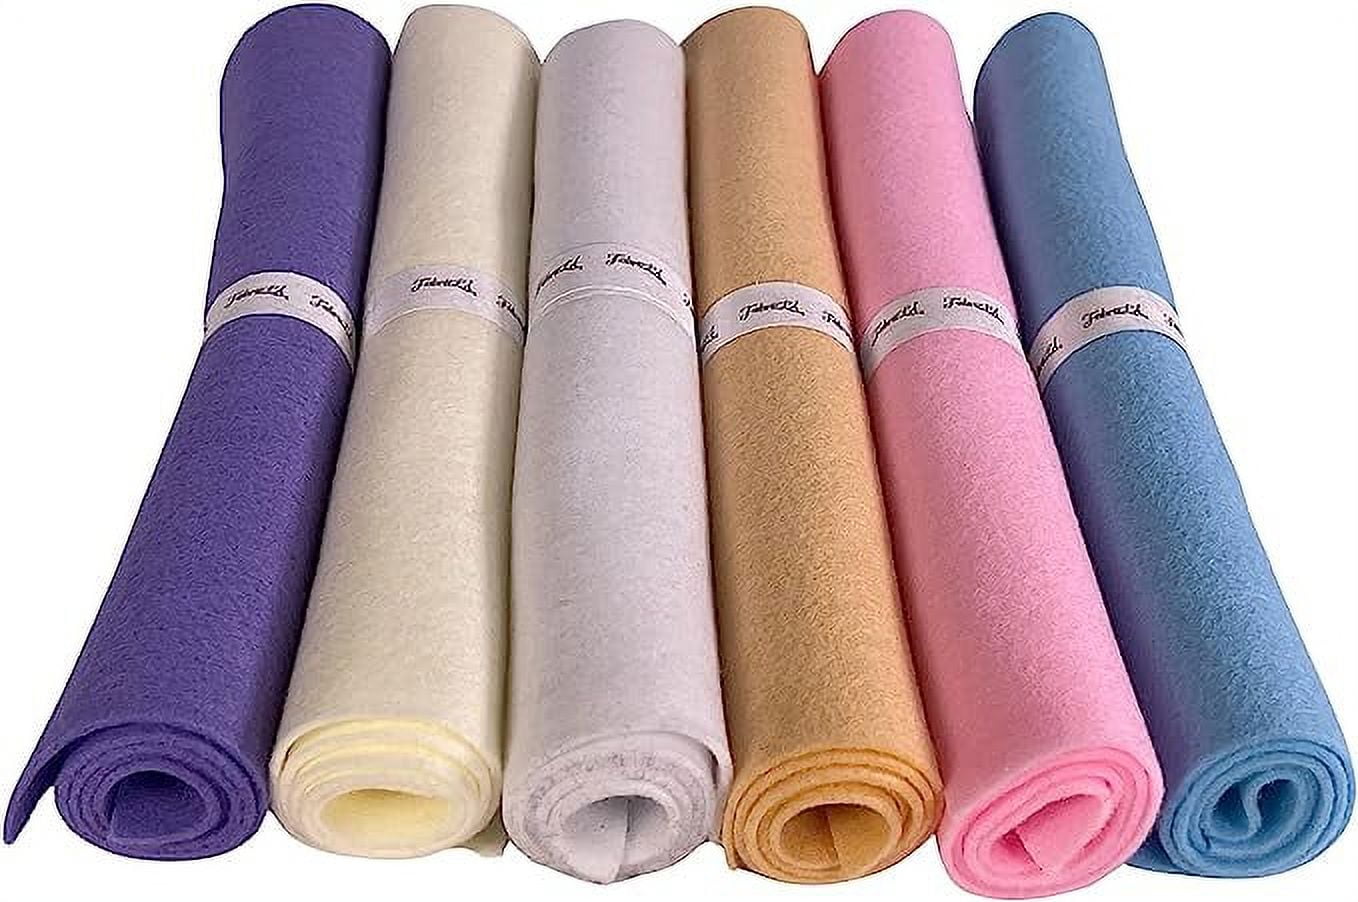 FabricLA Craft Felt Rolls 6 Pieces - 12 X 18 Inches Assorted Color  Non-Woven Soft Felt Material - Acrylic Felt Roll for DIY Craftwork, Sewing  and Patchwork - Autumn Colors